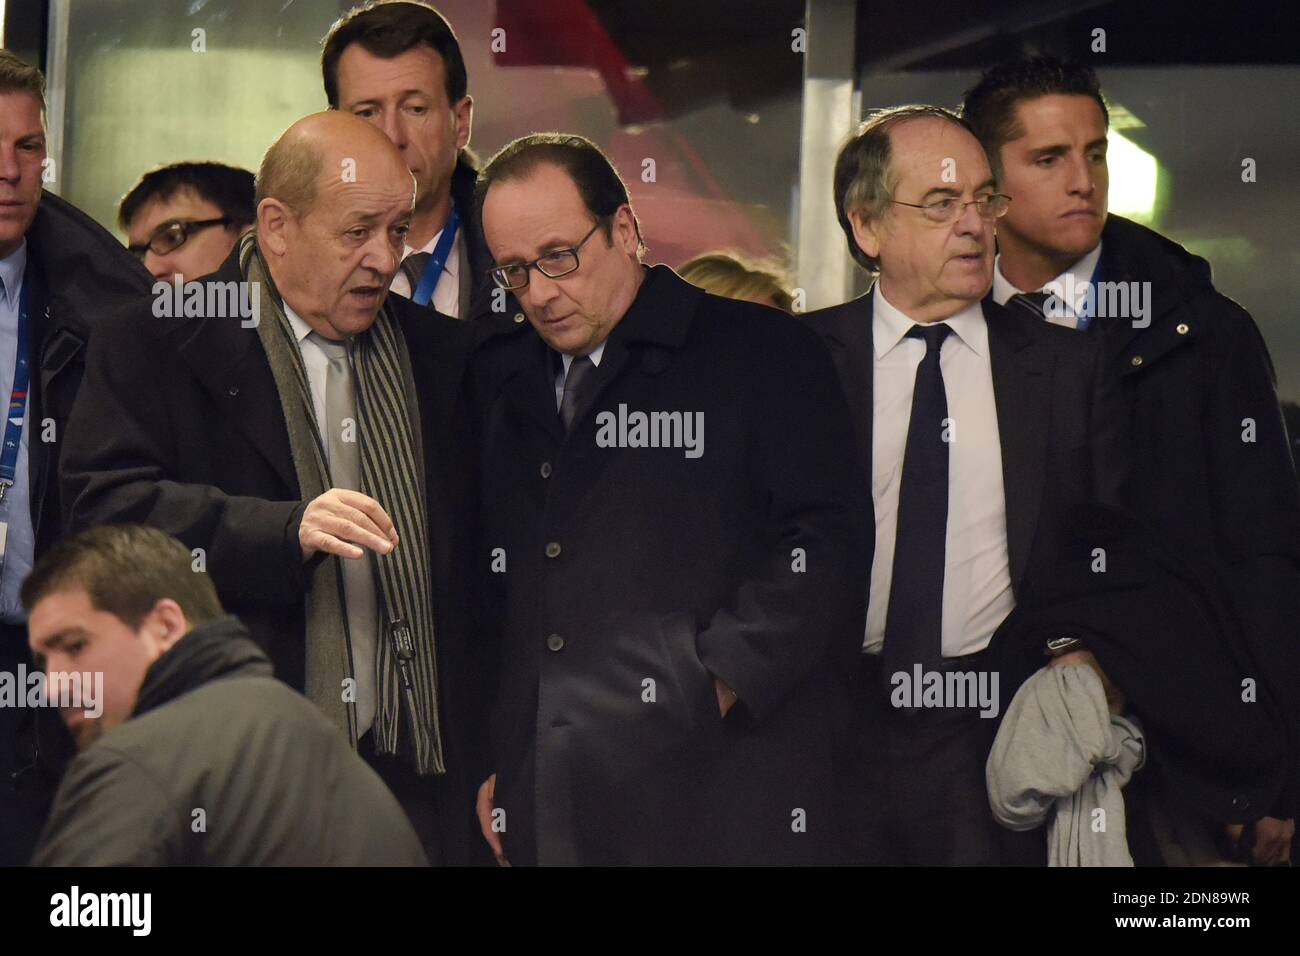 Defense Minister Jean-Yves Le Drian, President Francois Hollande and Noel Le Graet watch from the stands the friendly international football match, France v Brazil at the Stade de France in Saint-Denis near Paris, France, on March 26, 2015. Brazil won 3-1. Photo by Laurent Zabulon/ABACAPRESS.COM? Stock Photo